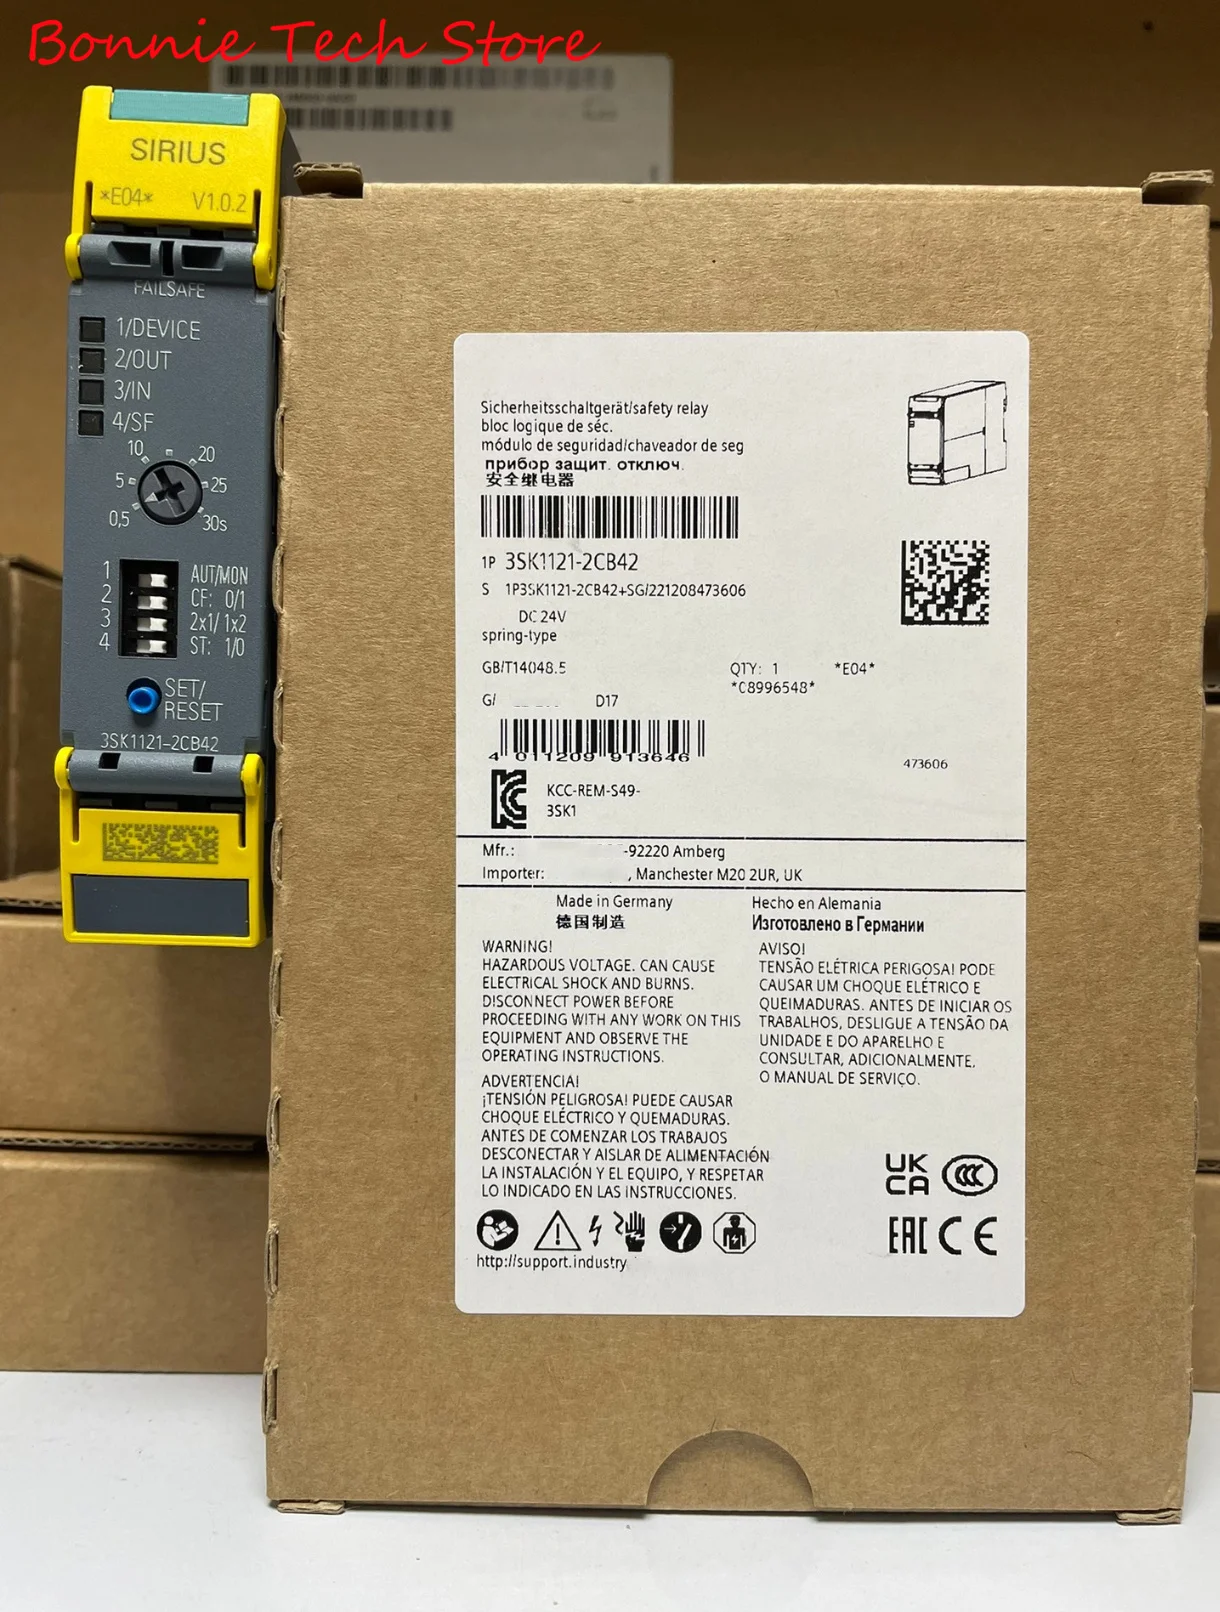 

3SK1121-2CB42 for Siemens SIRIUS safety relay